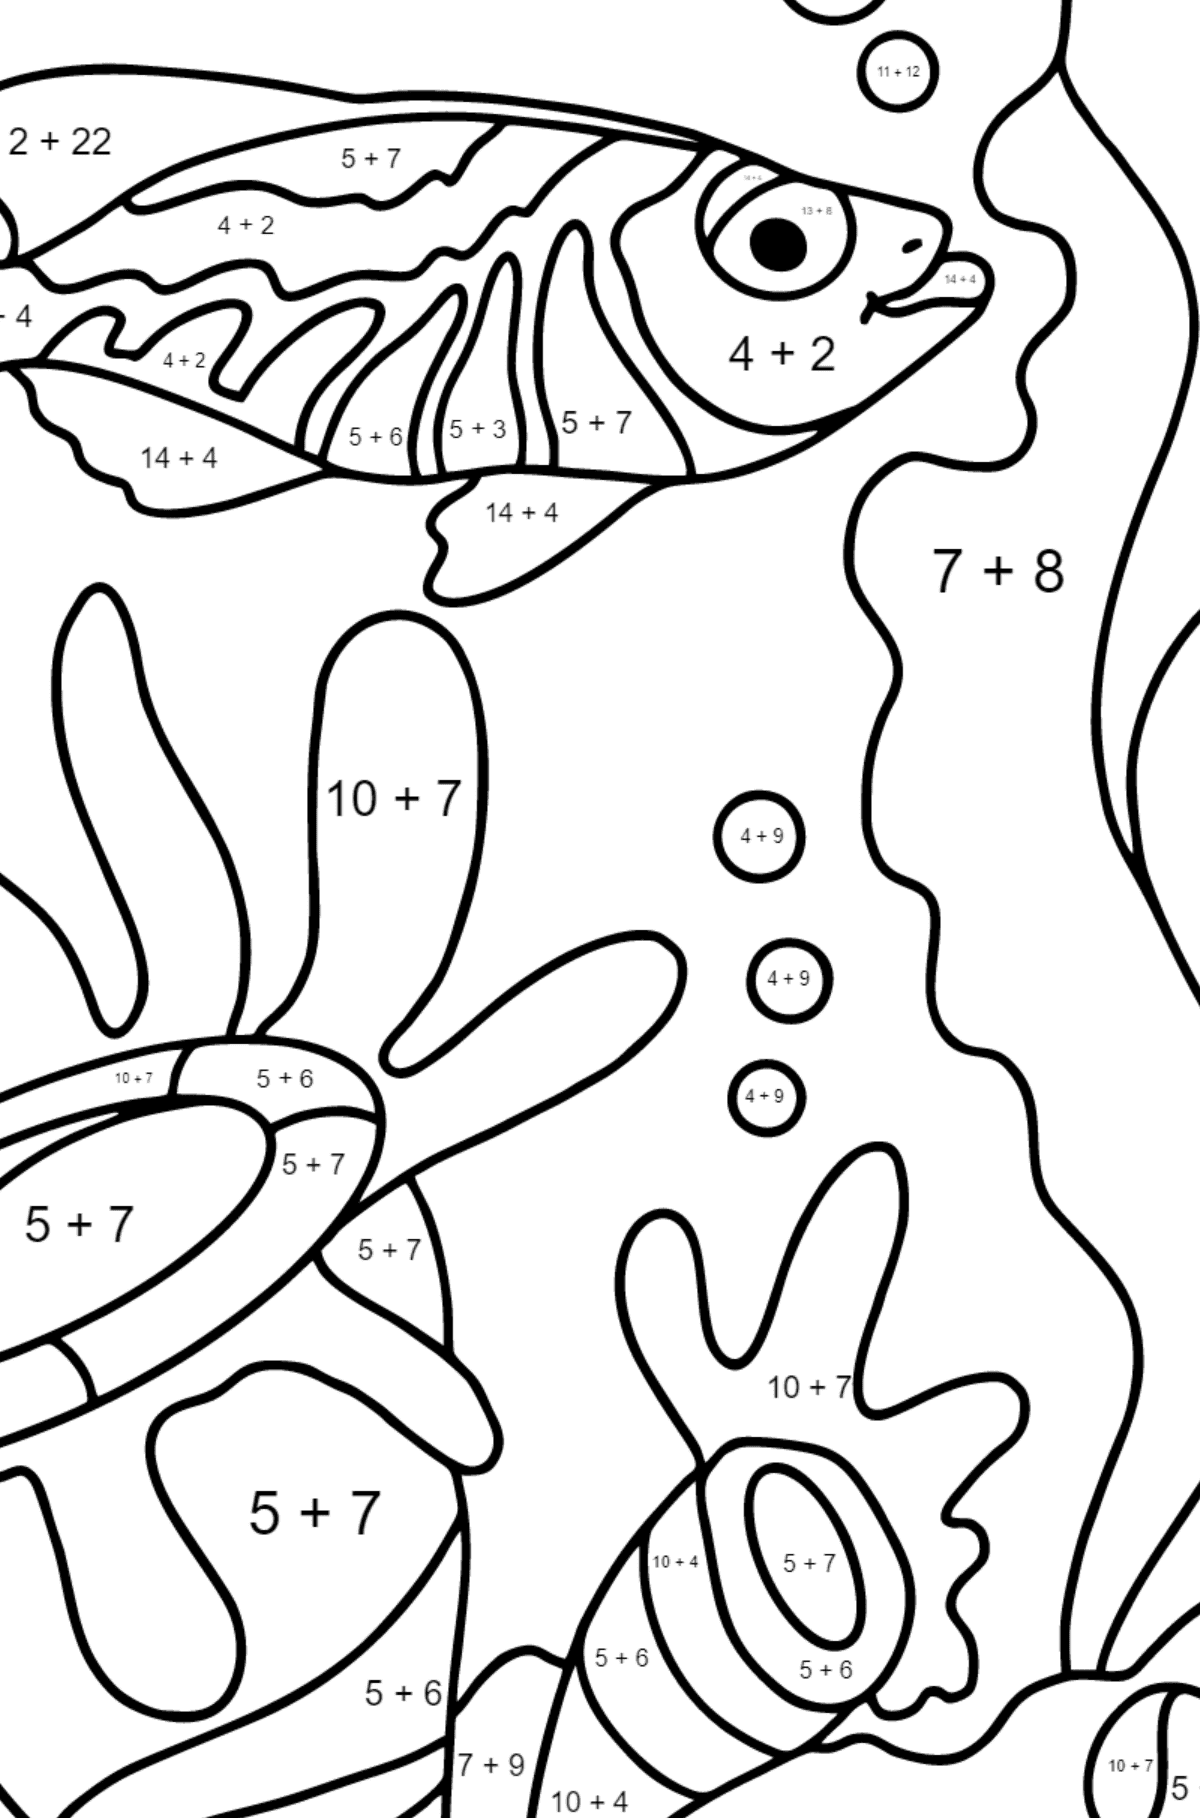 Coloring Page - A Fish is Swimming - Math Coloring - Addition for Kids